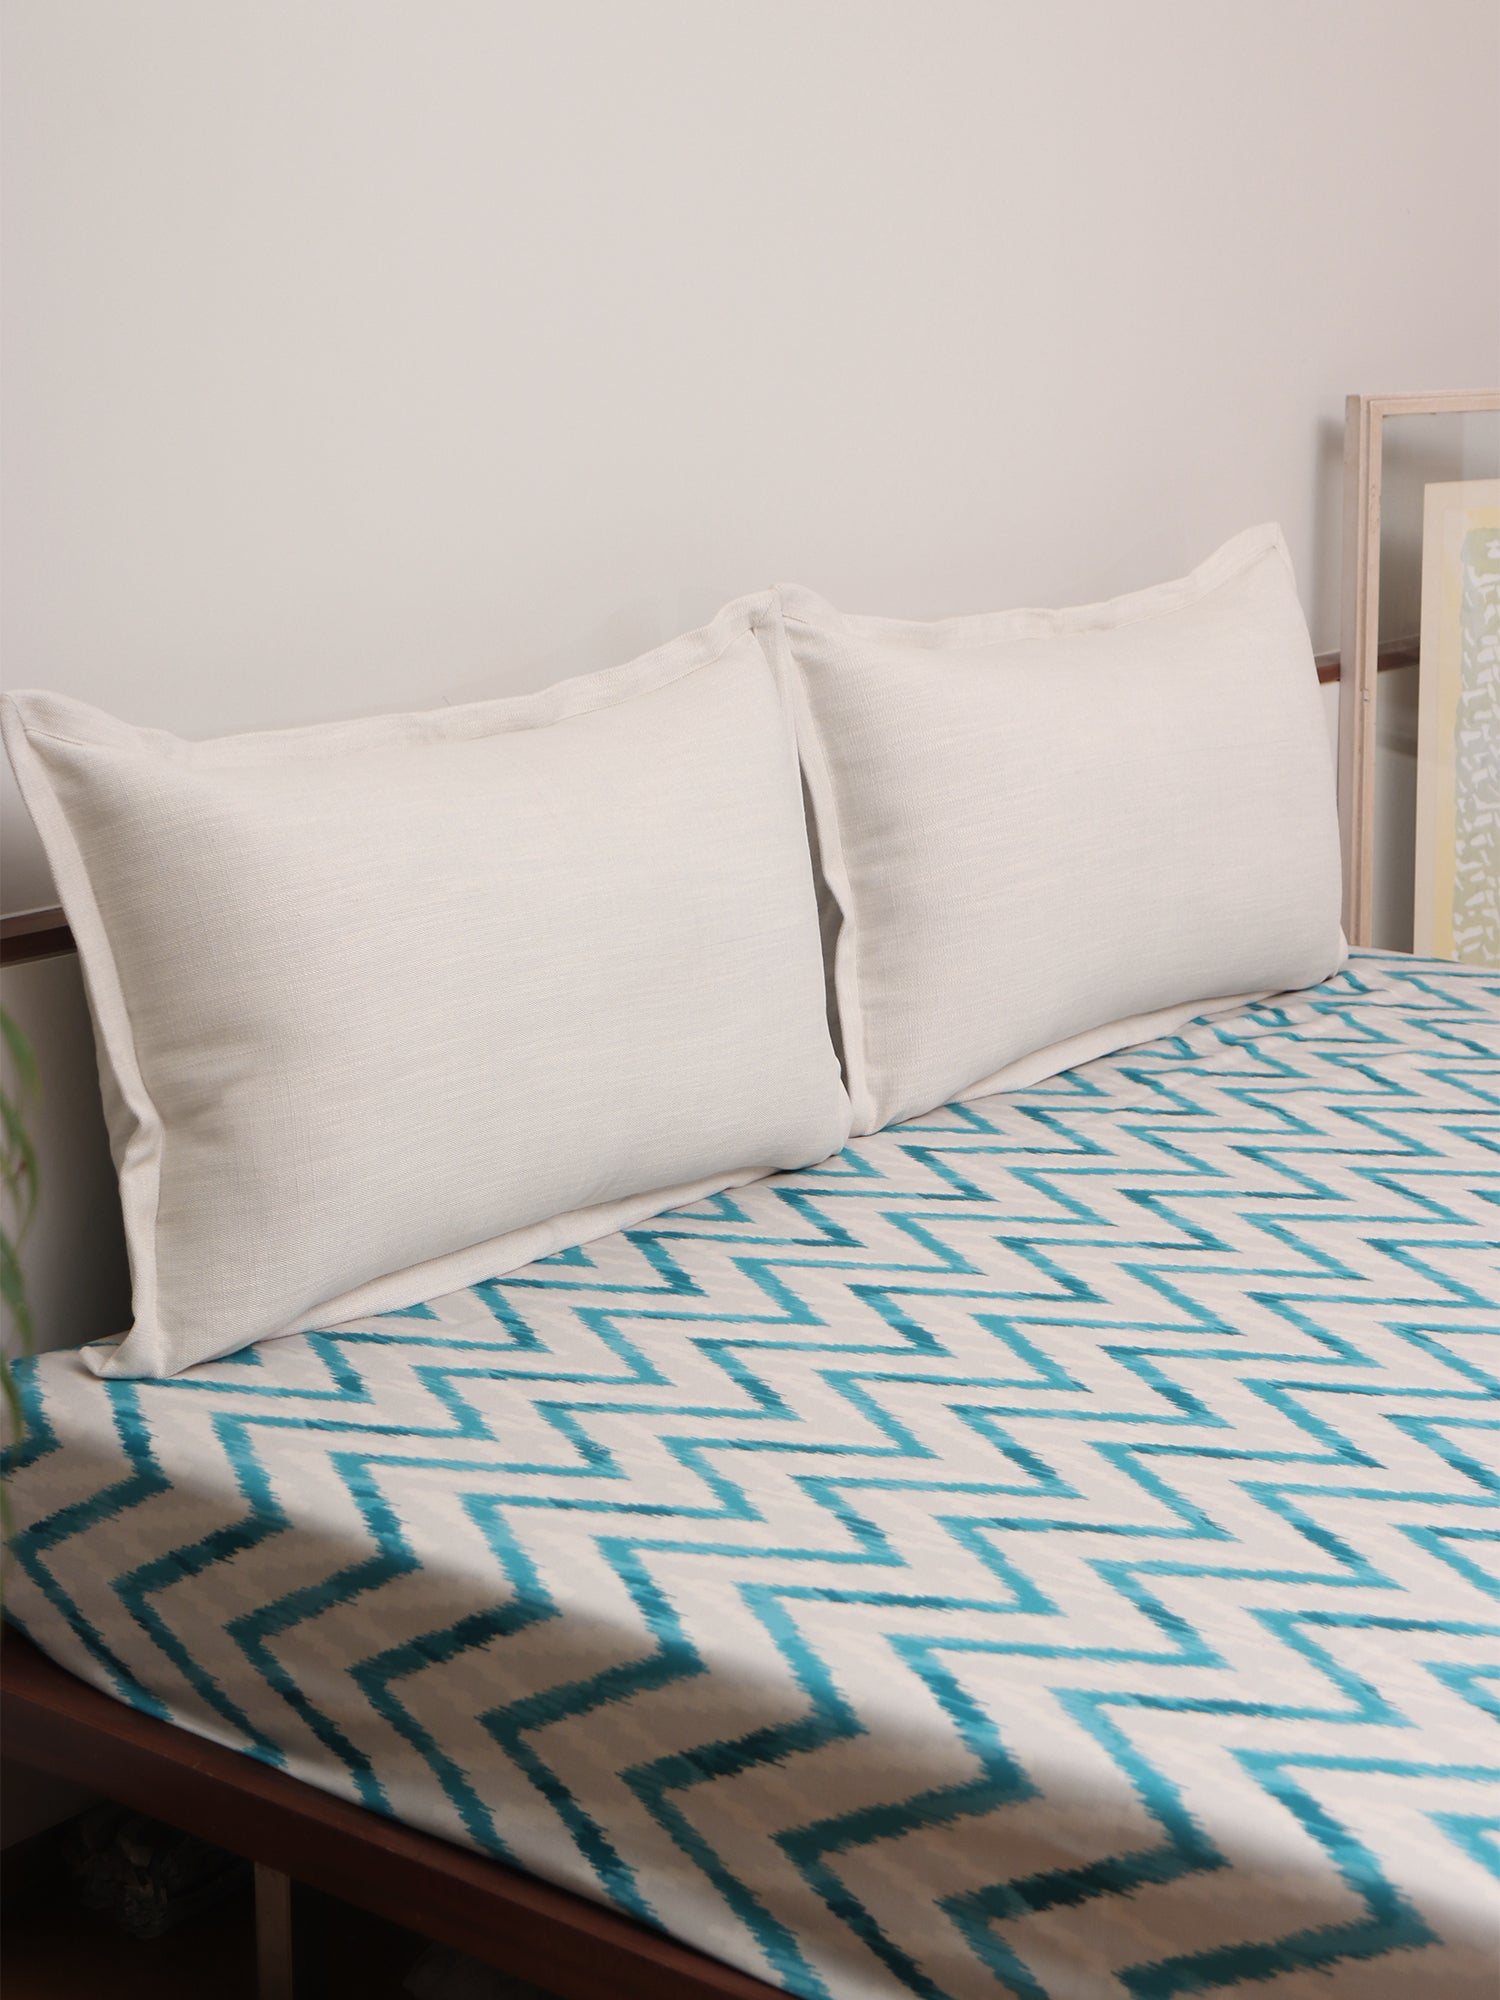 blue colored chevron printed bed cover with 2 matching pillow covers made from cotton blend for queen size double bed 90x108 inch